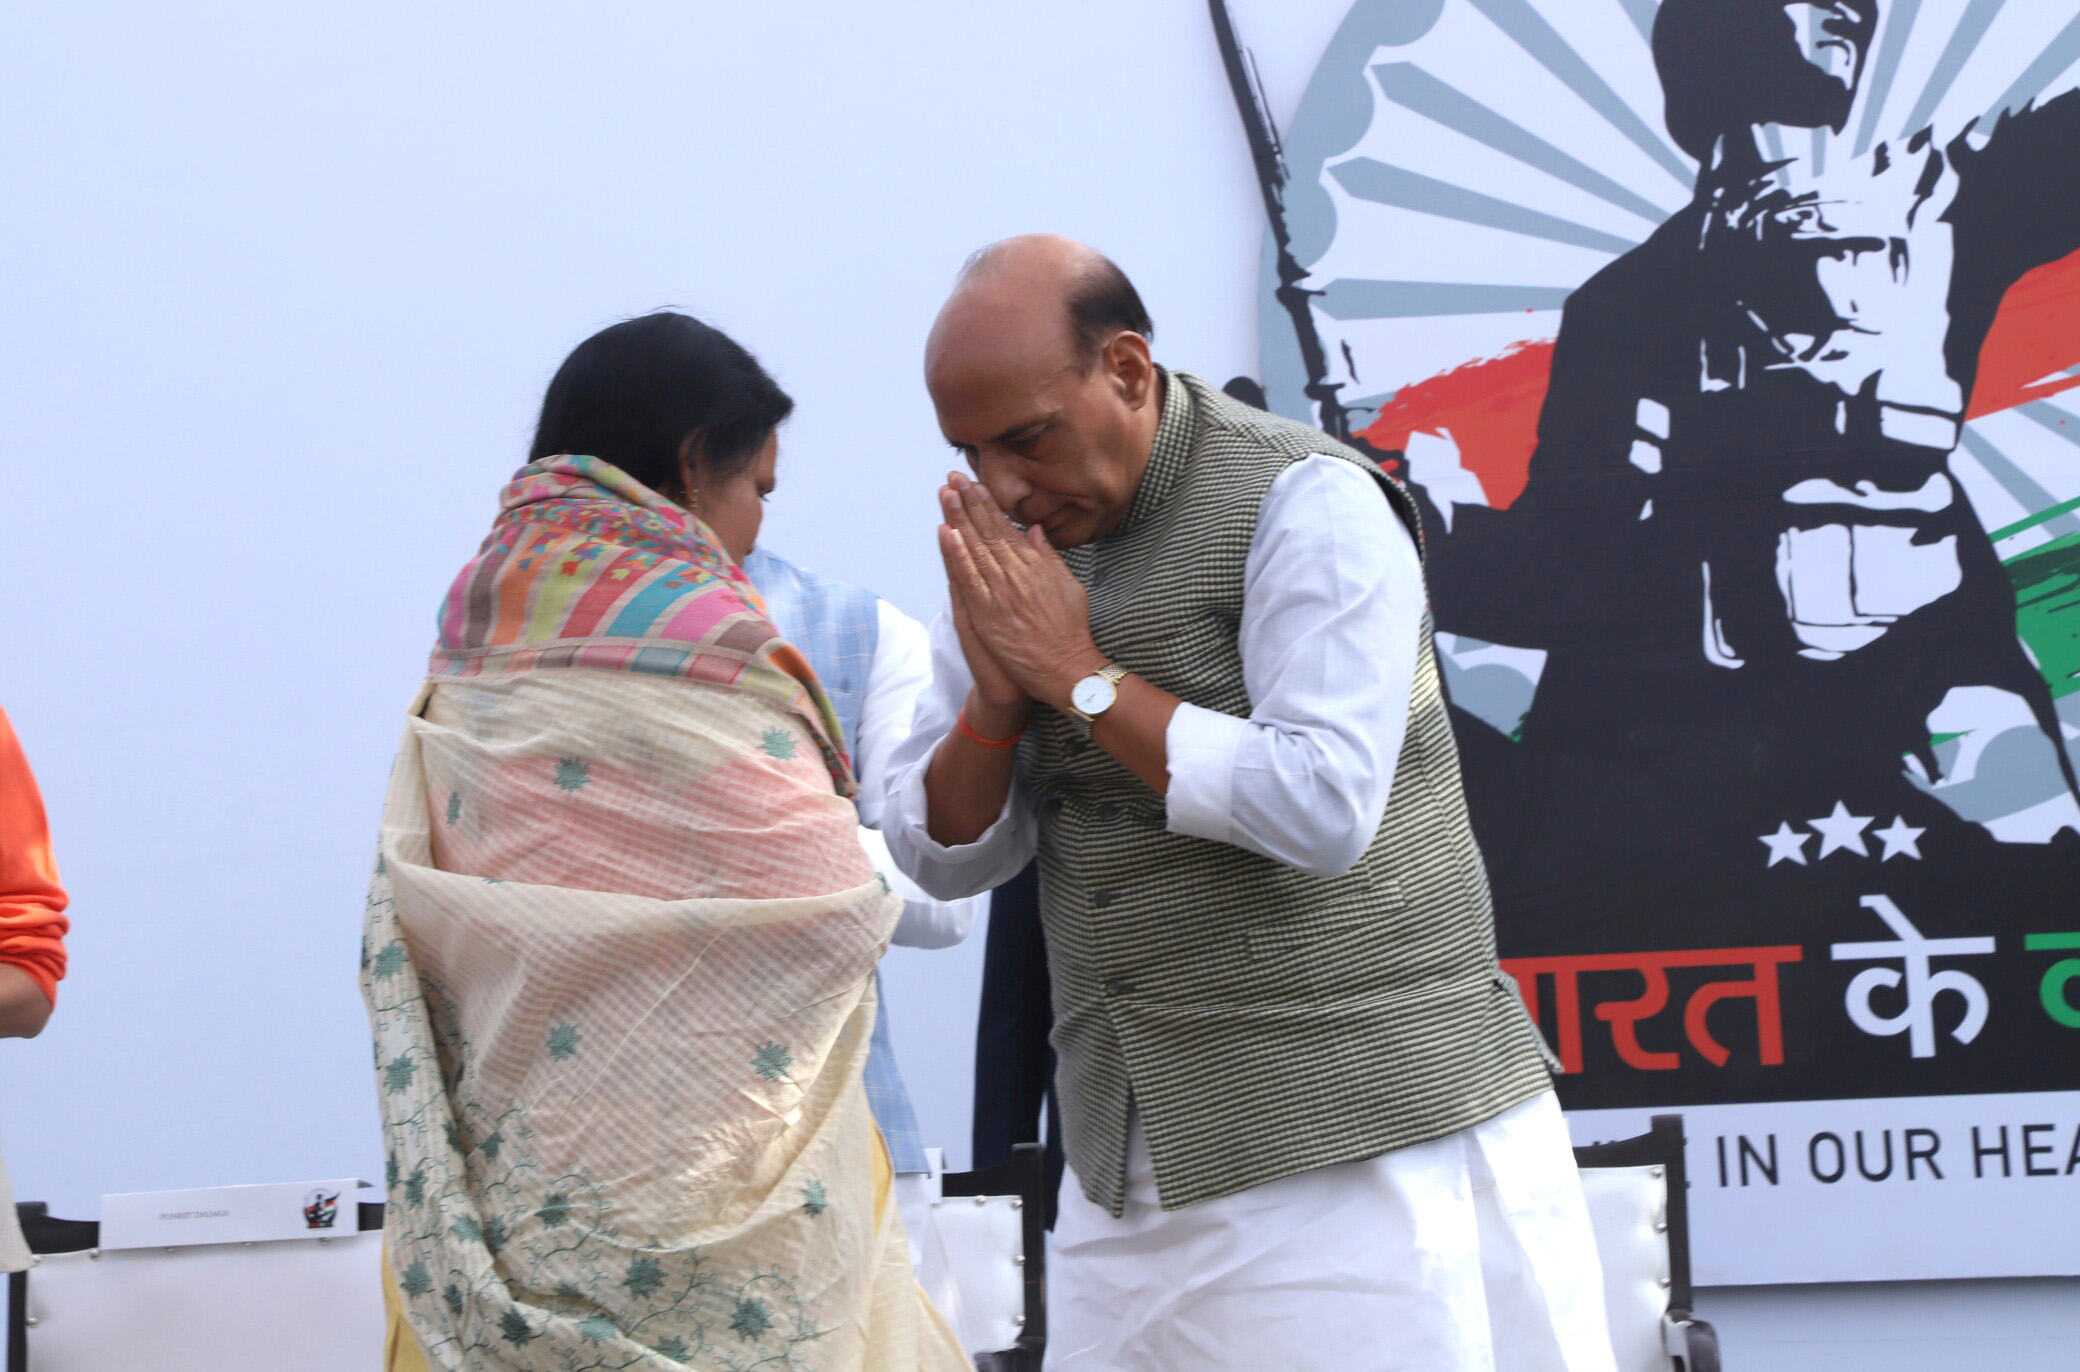 The Union Home Minister, Shri Rajnath Singh greeting a family member of a martyr, at a function to raise funds for the Bharat ke Veer fund, in New Delhi on January 20, 2018.